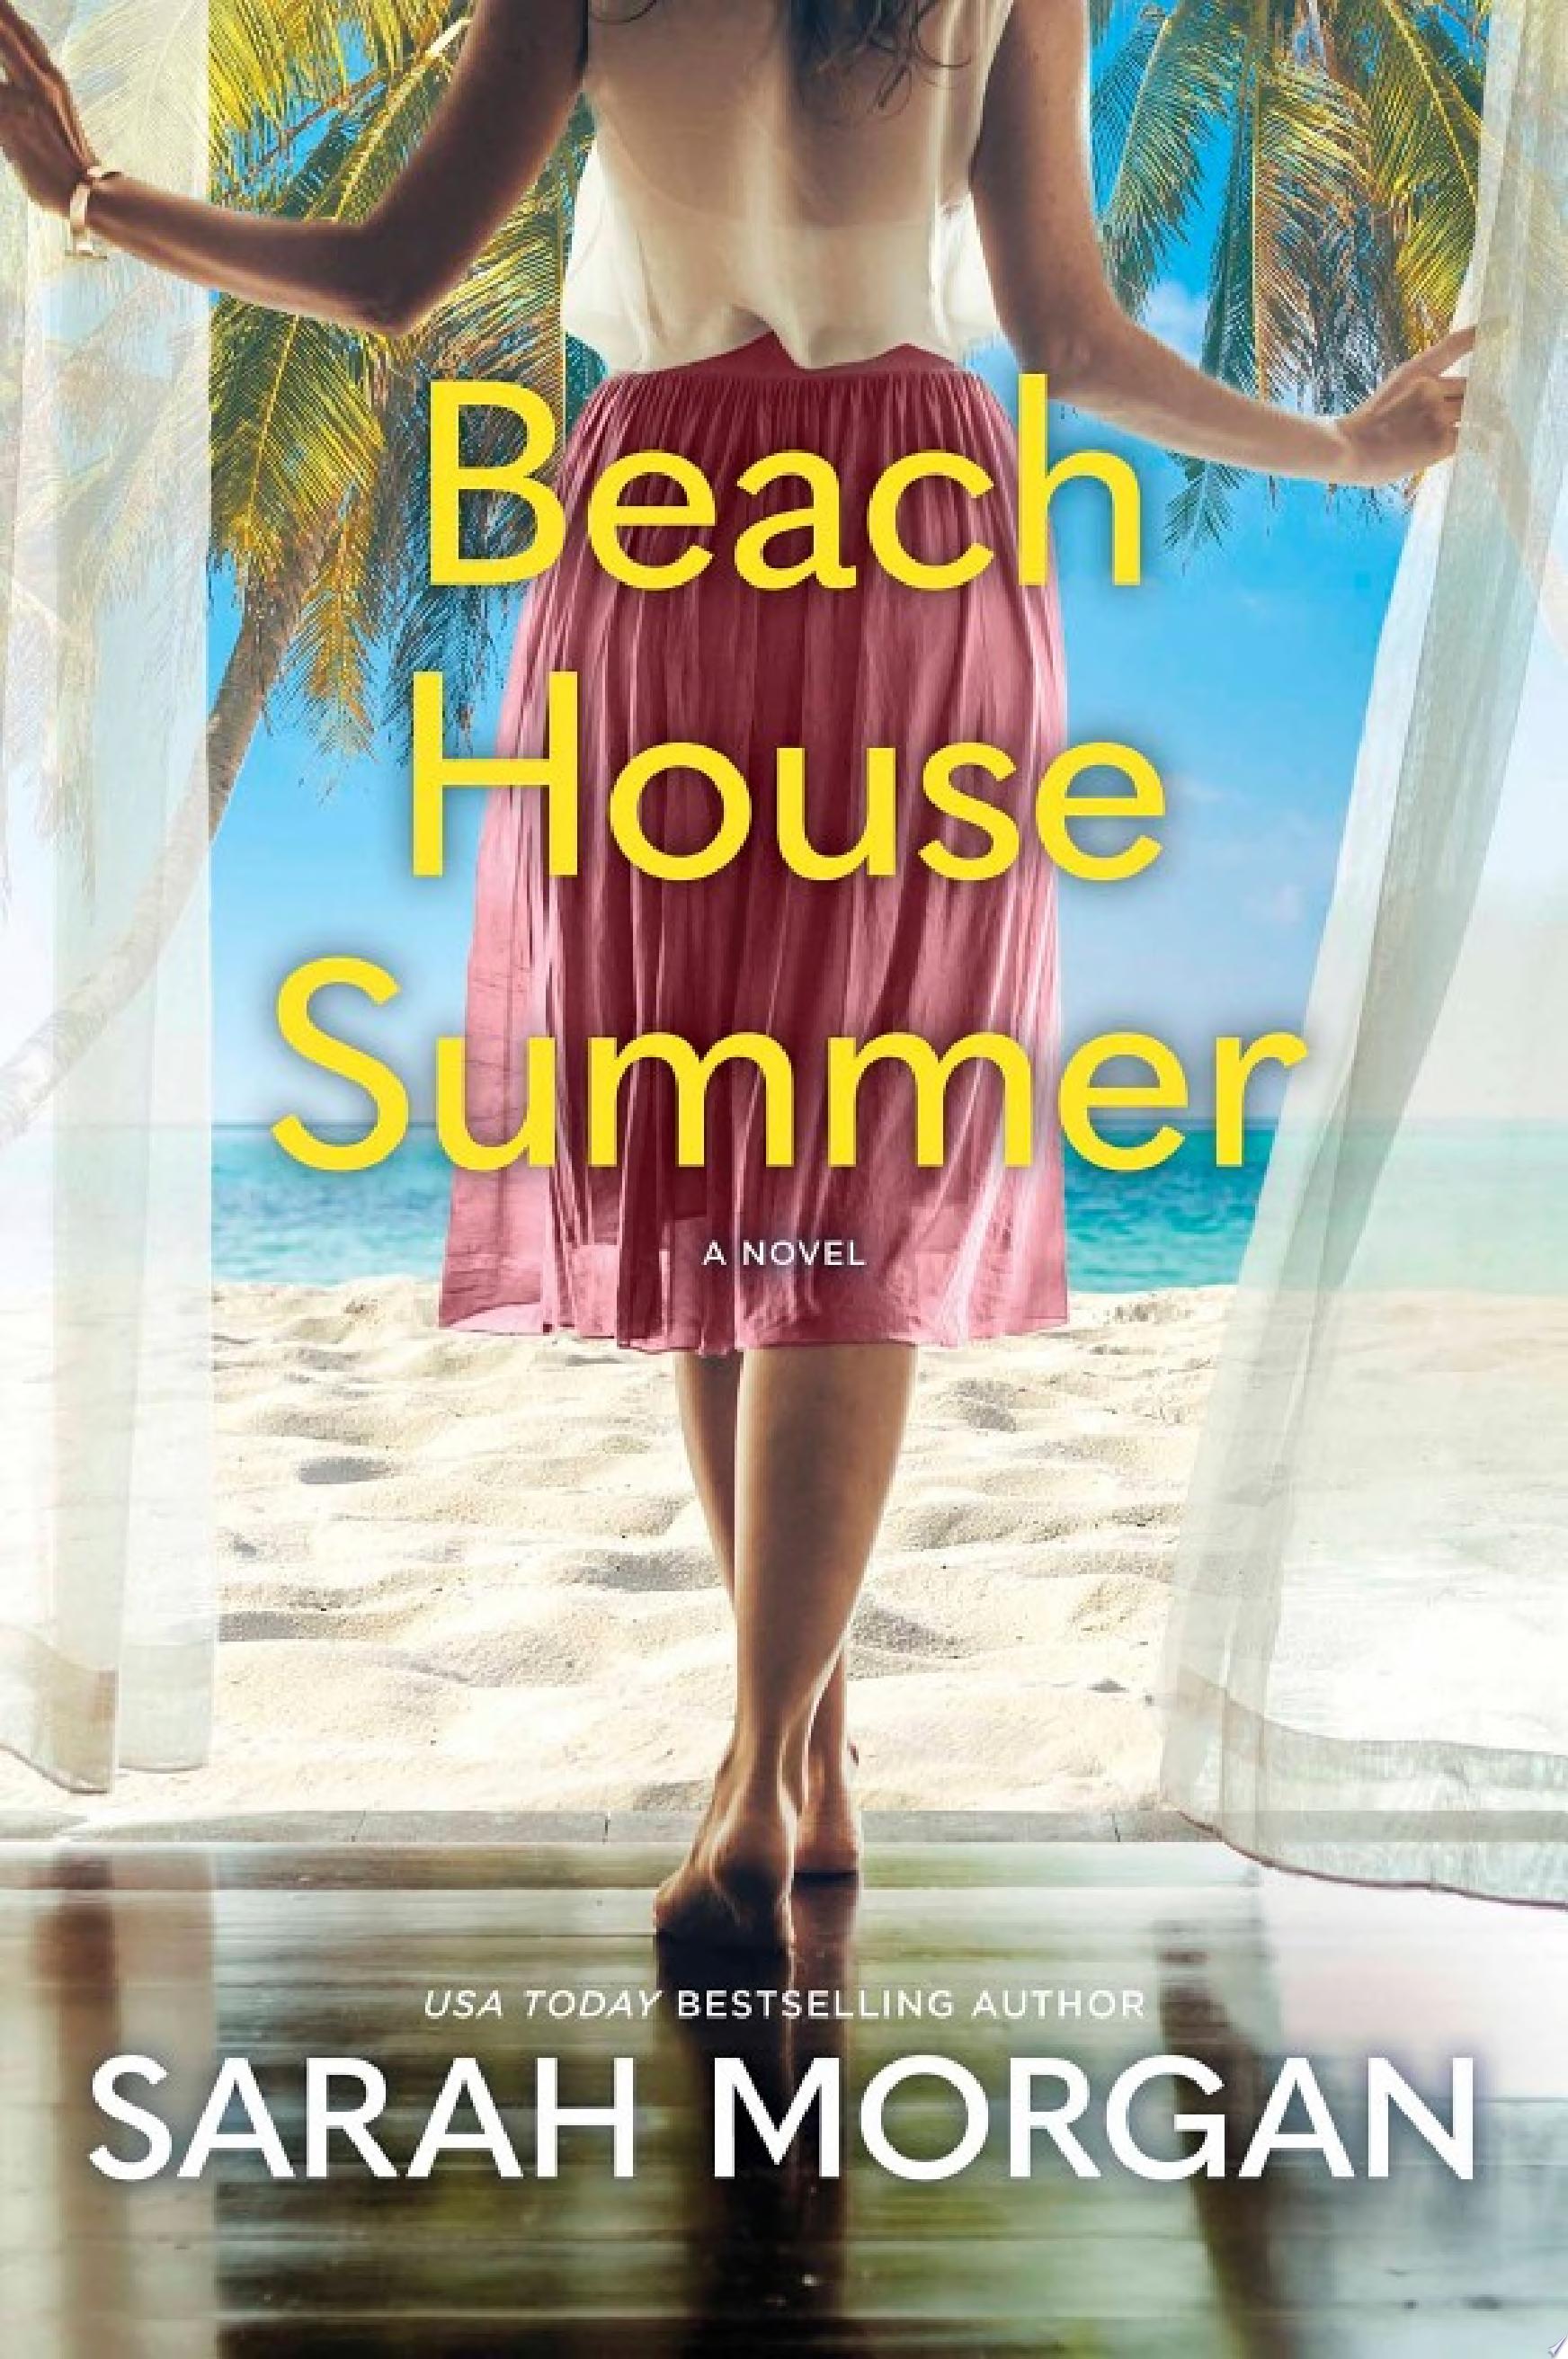 Image for "Beach House Summer"